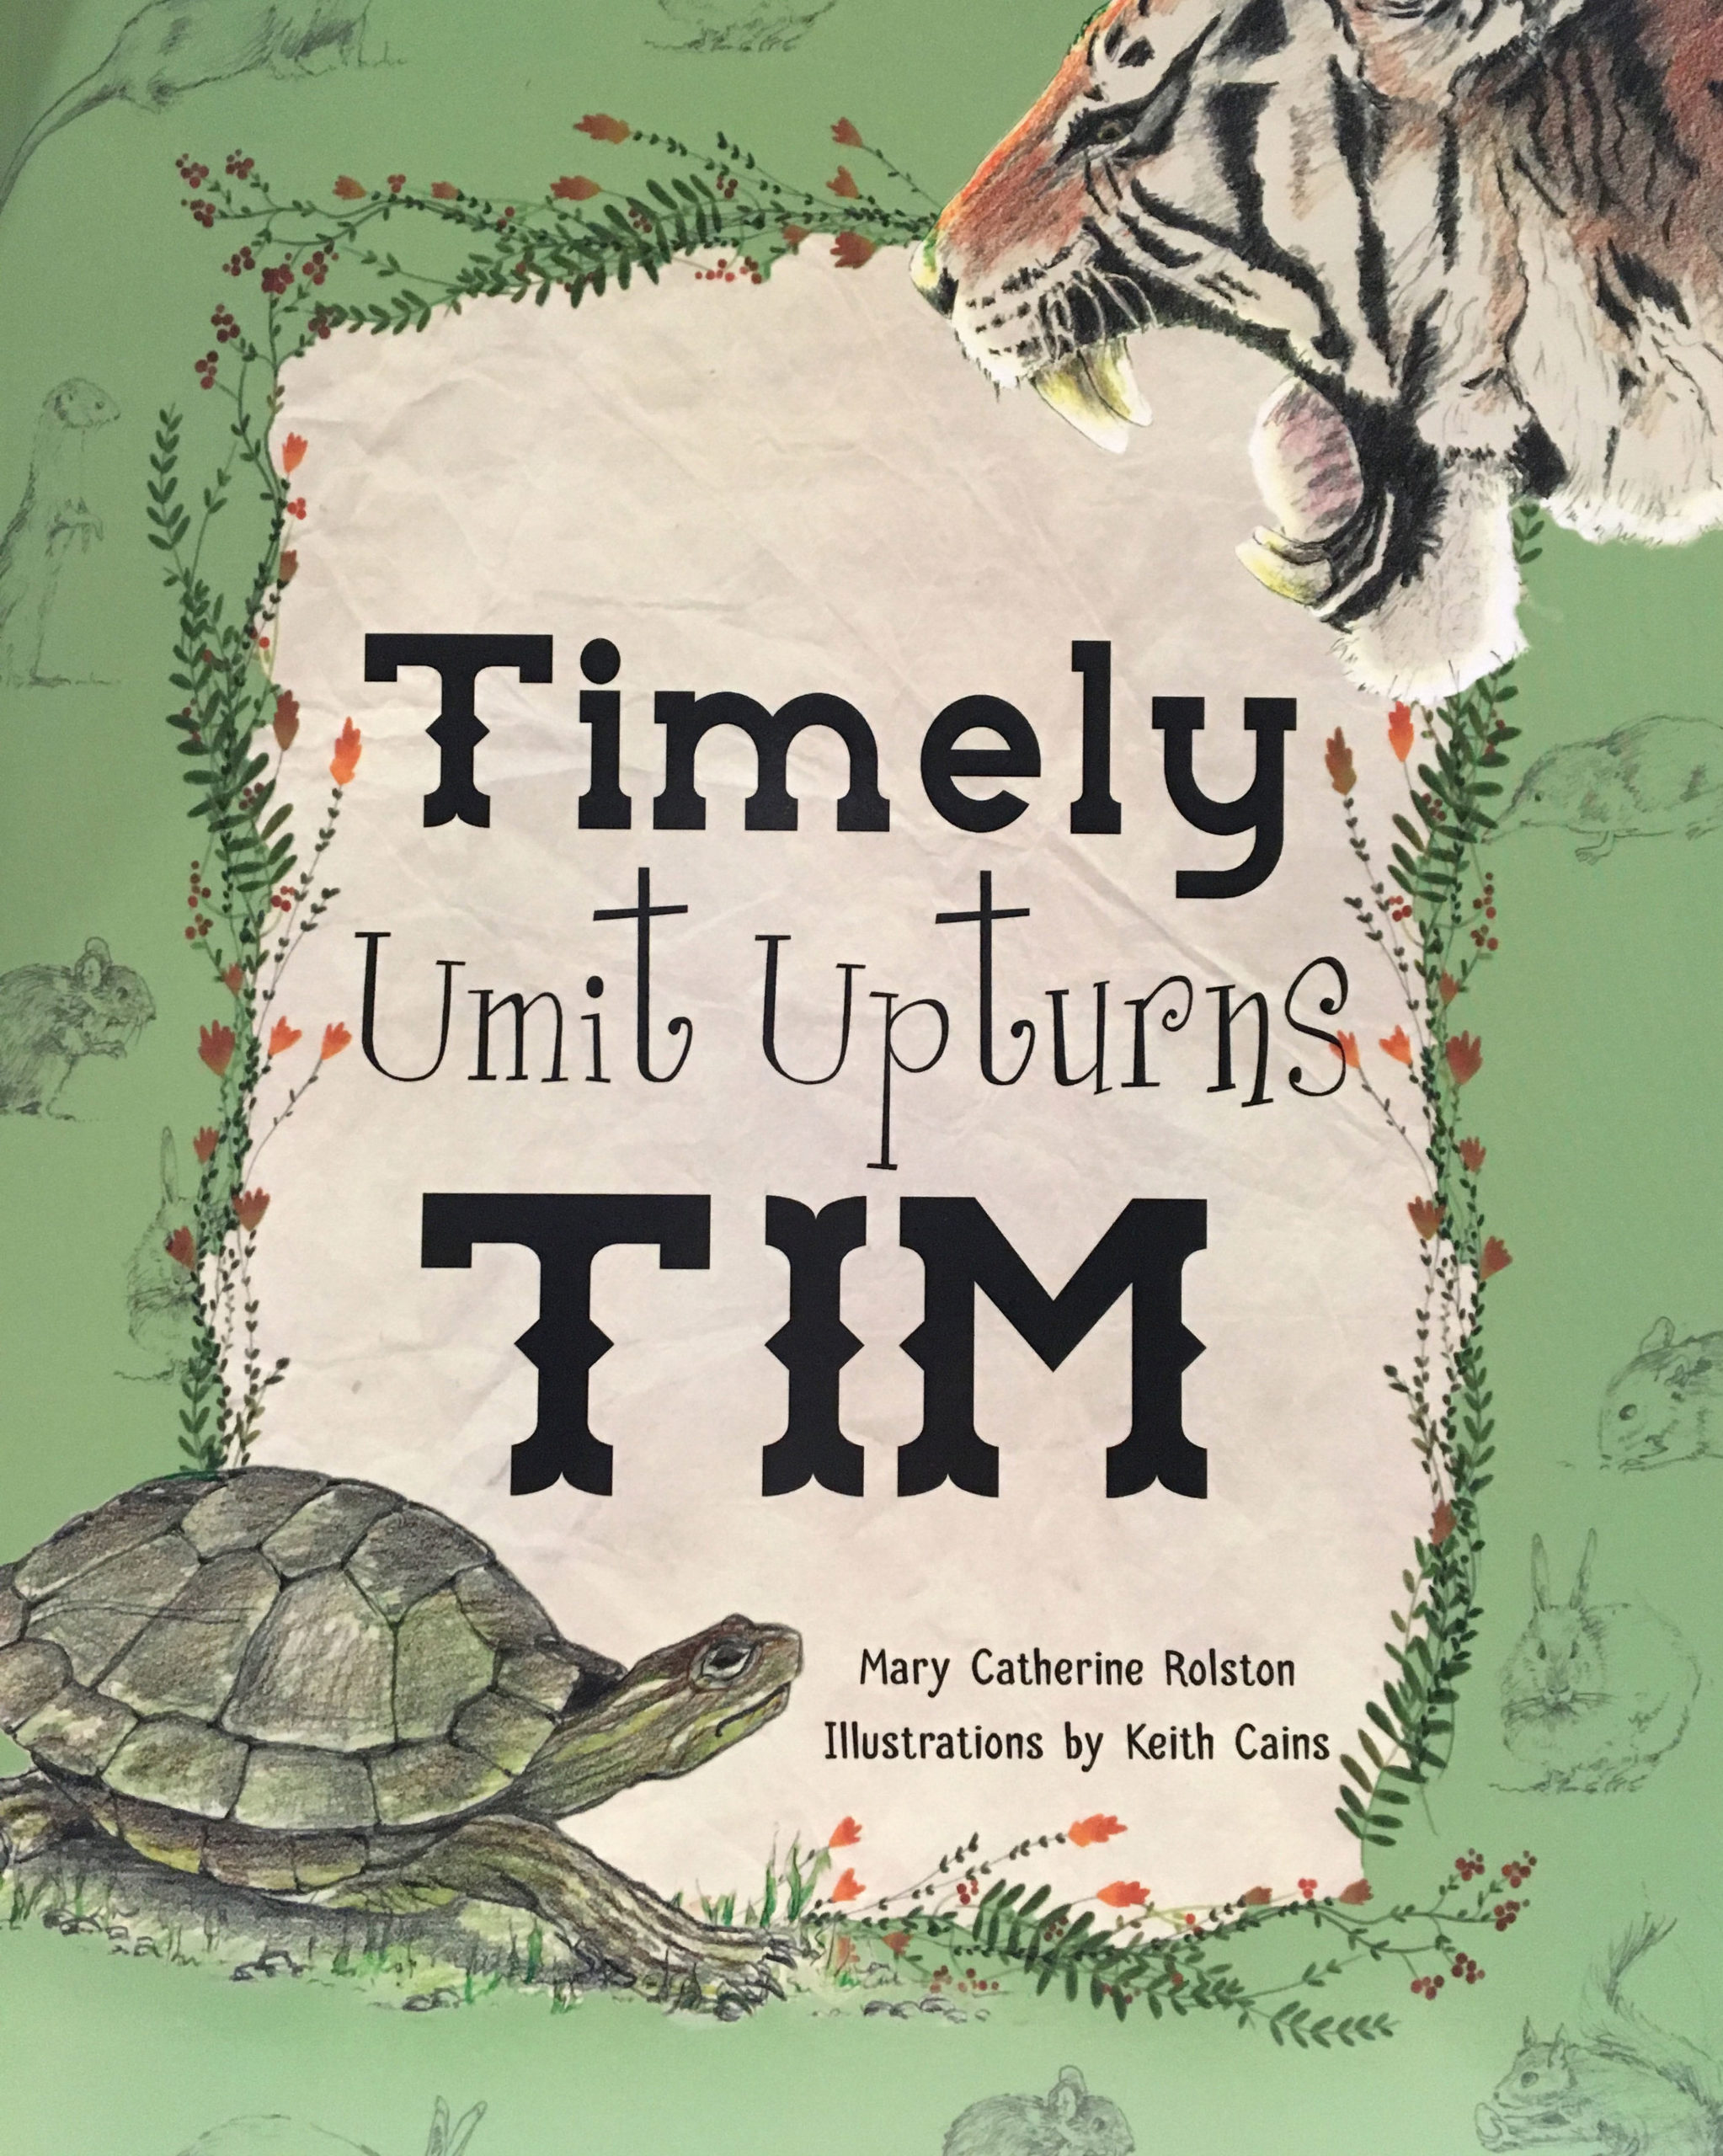 The cover for the children's story "Timely Umit Upturns Tim"